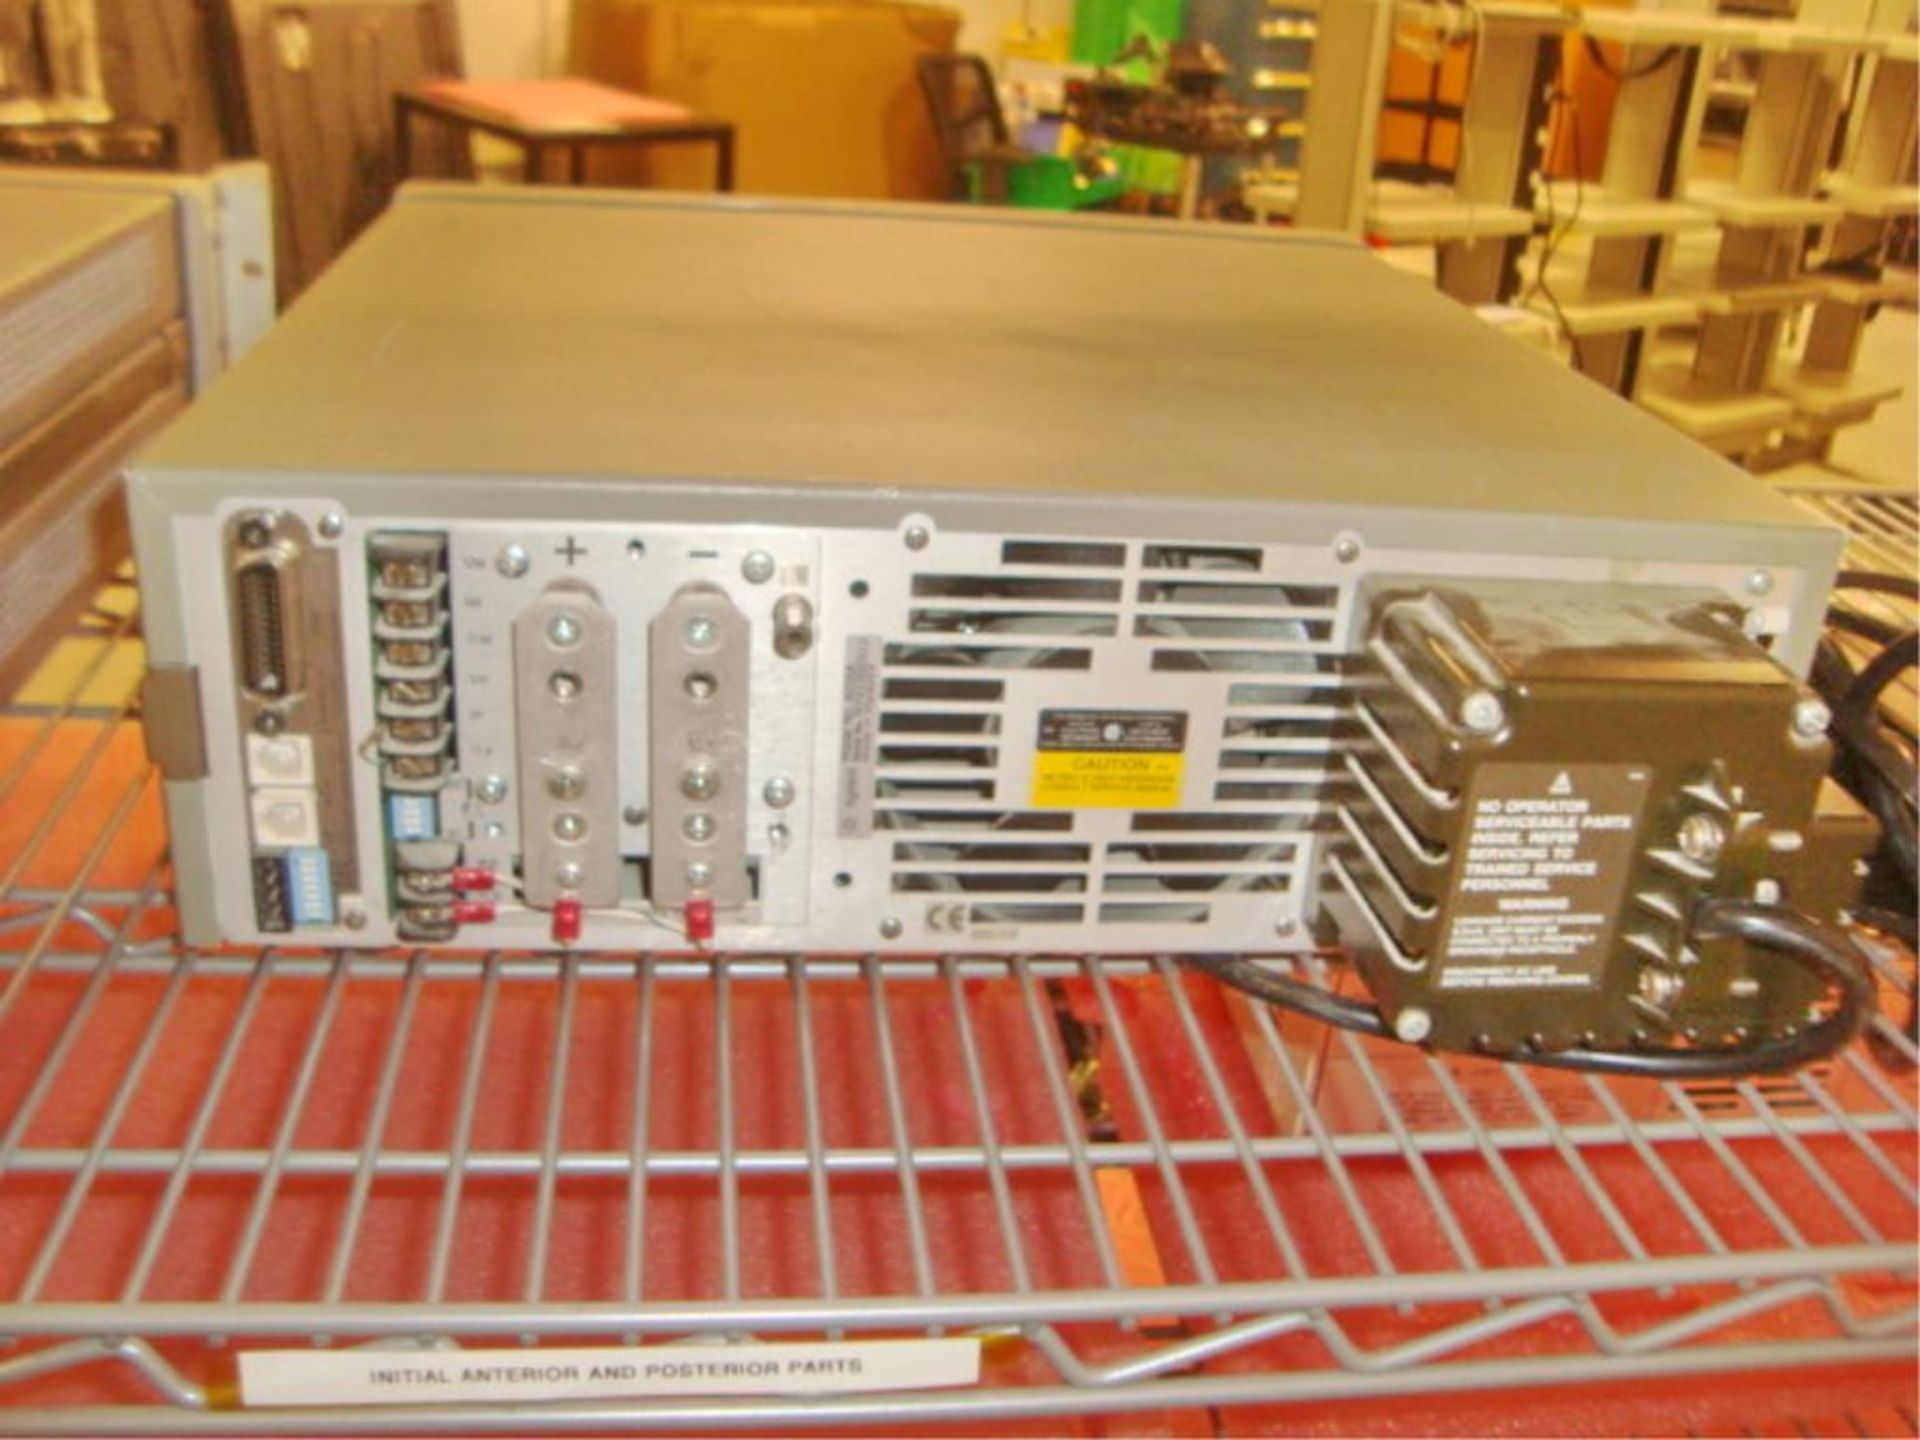 System Power Supplies - Image 2 of 5